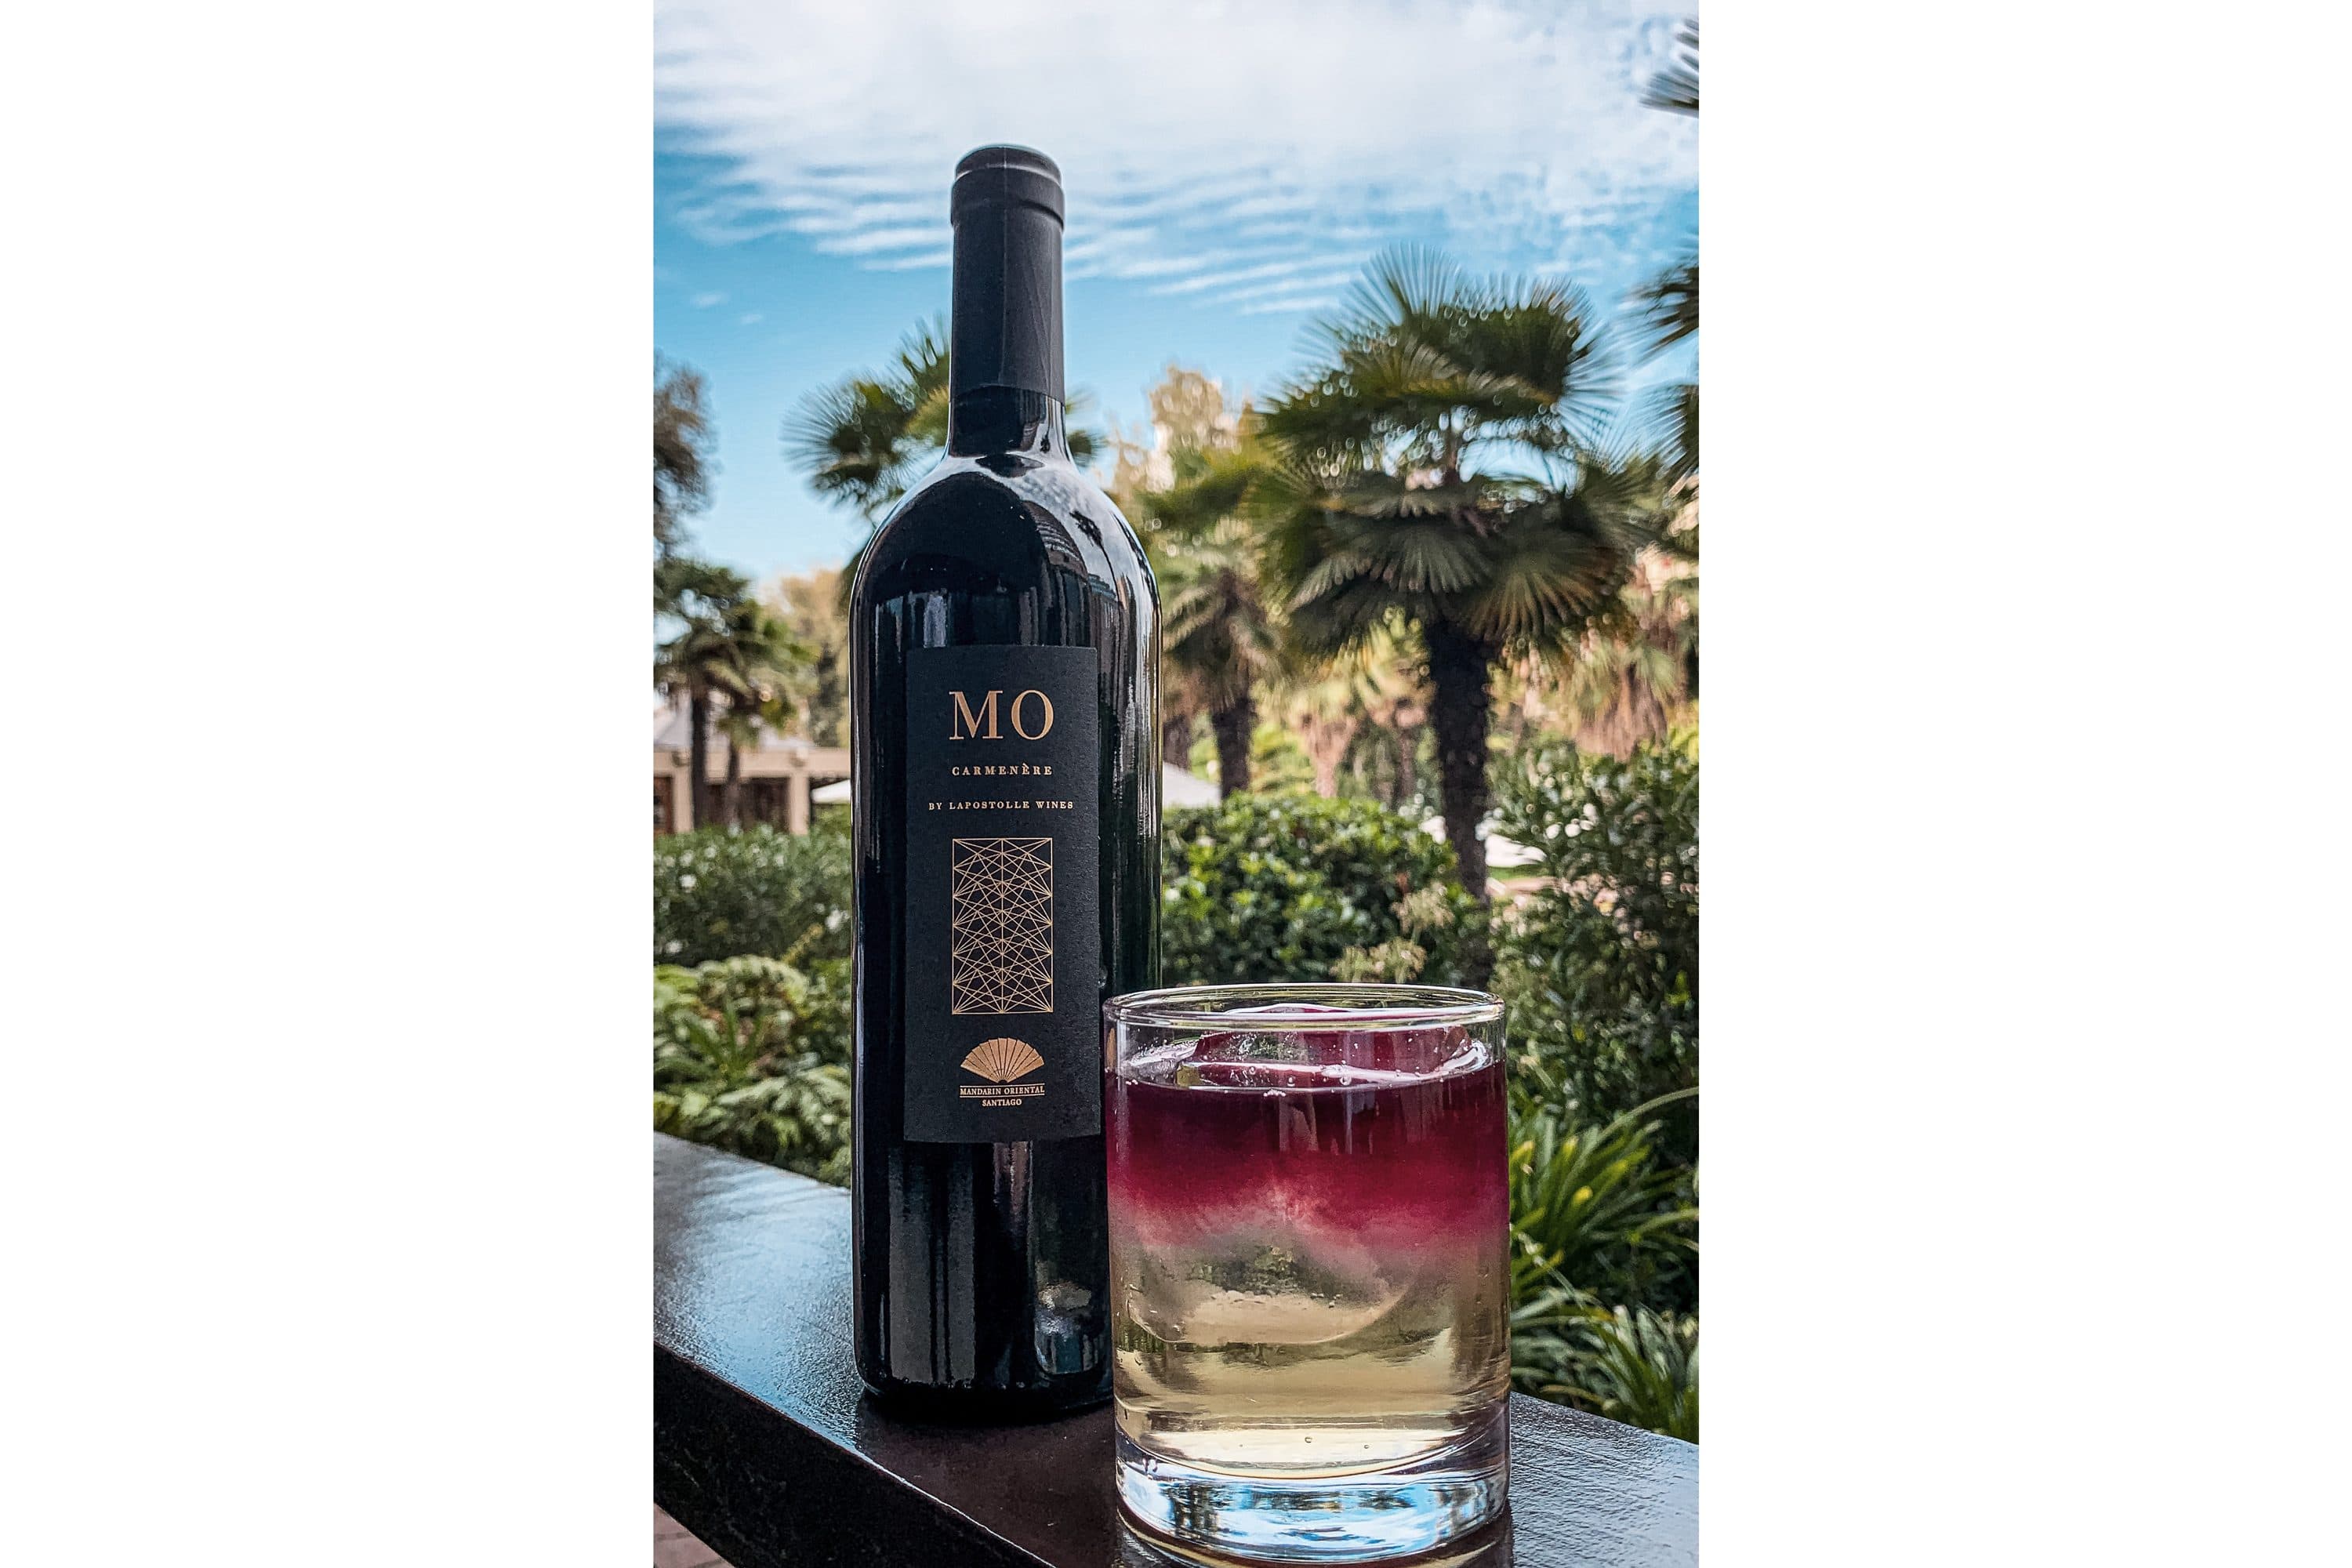 MO Whisky Sour cocktail and MO branded wine bottle